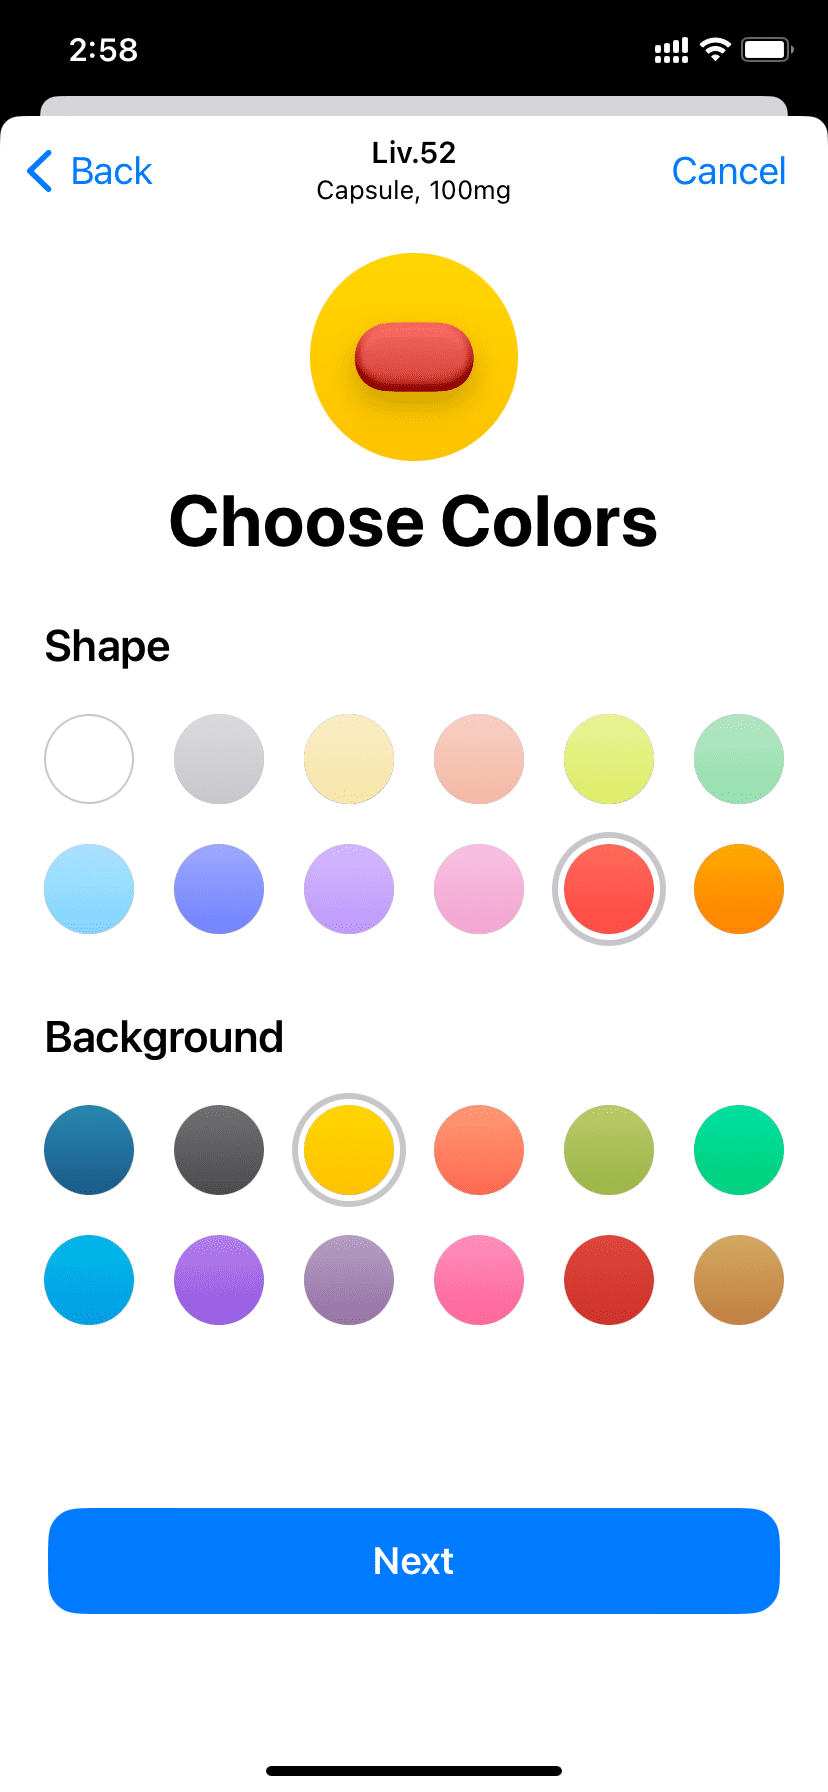 Choose colors for your medicine in iPhone Health